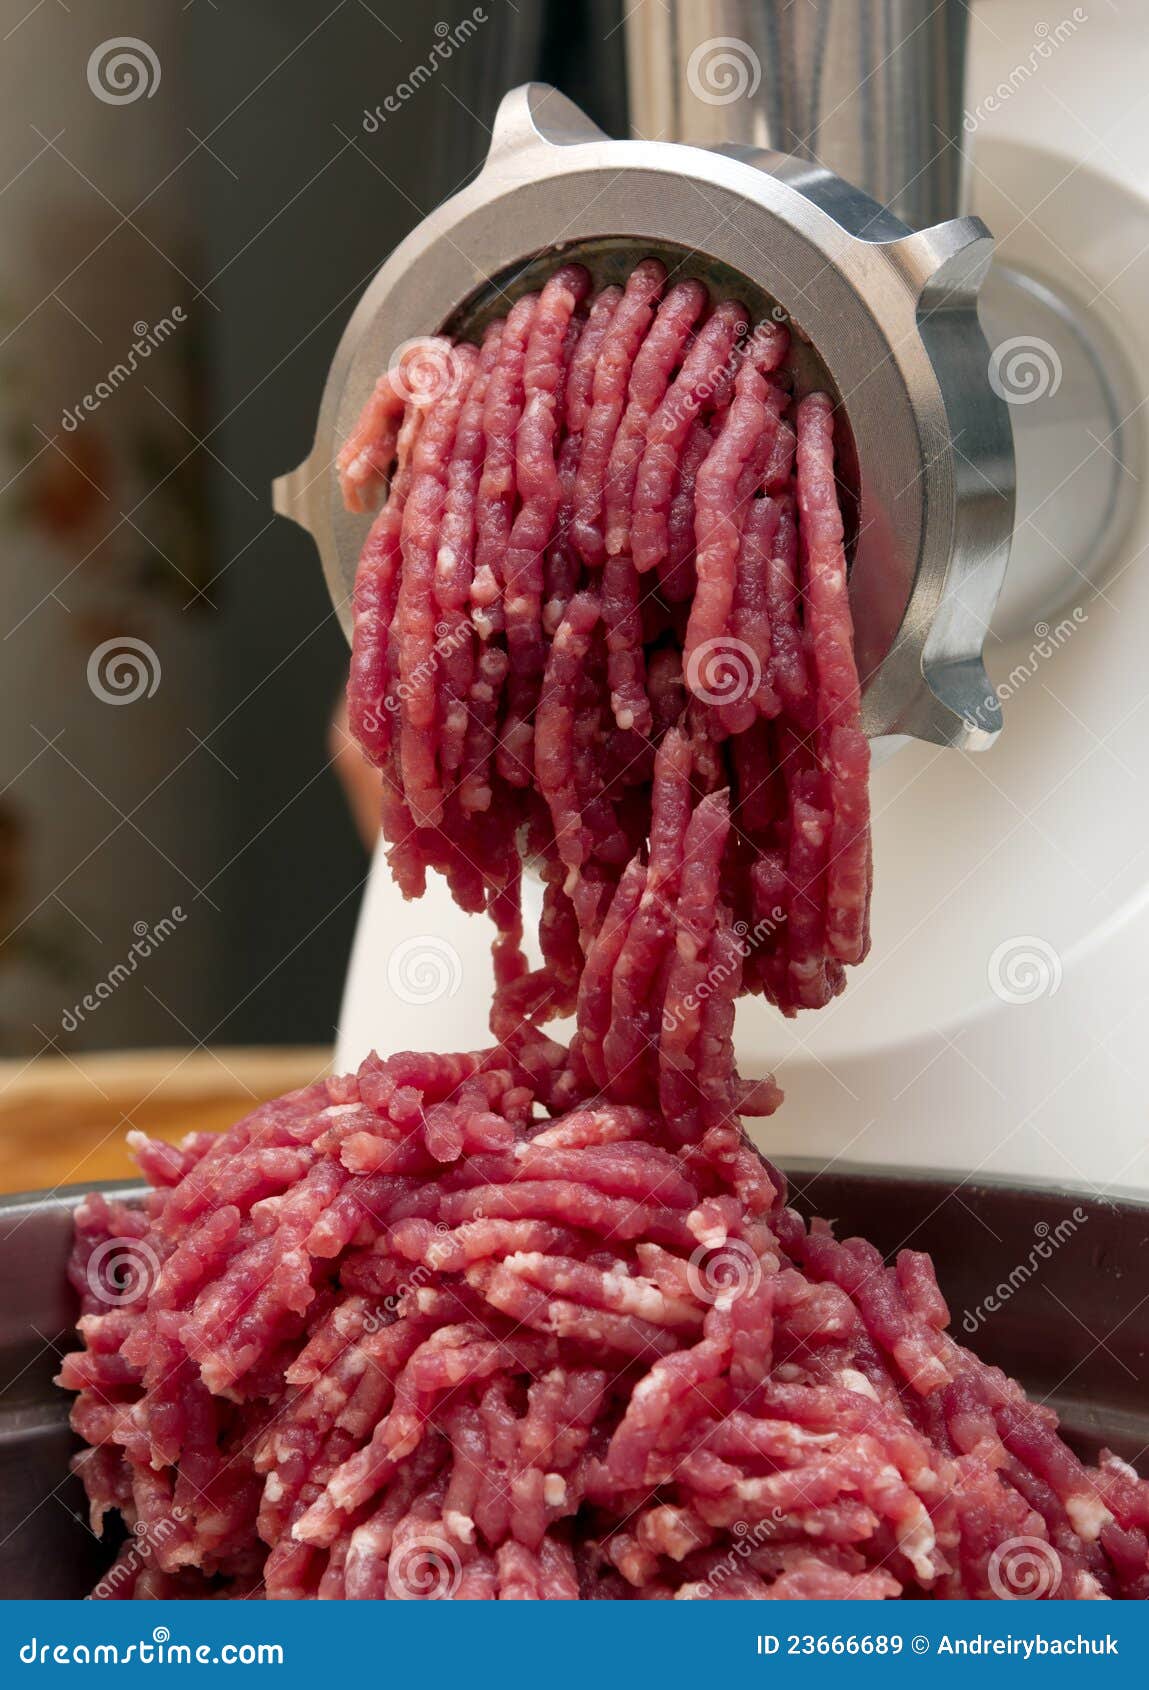 minced meat in grinder